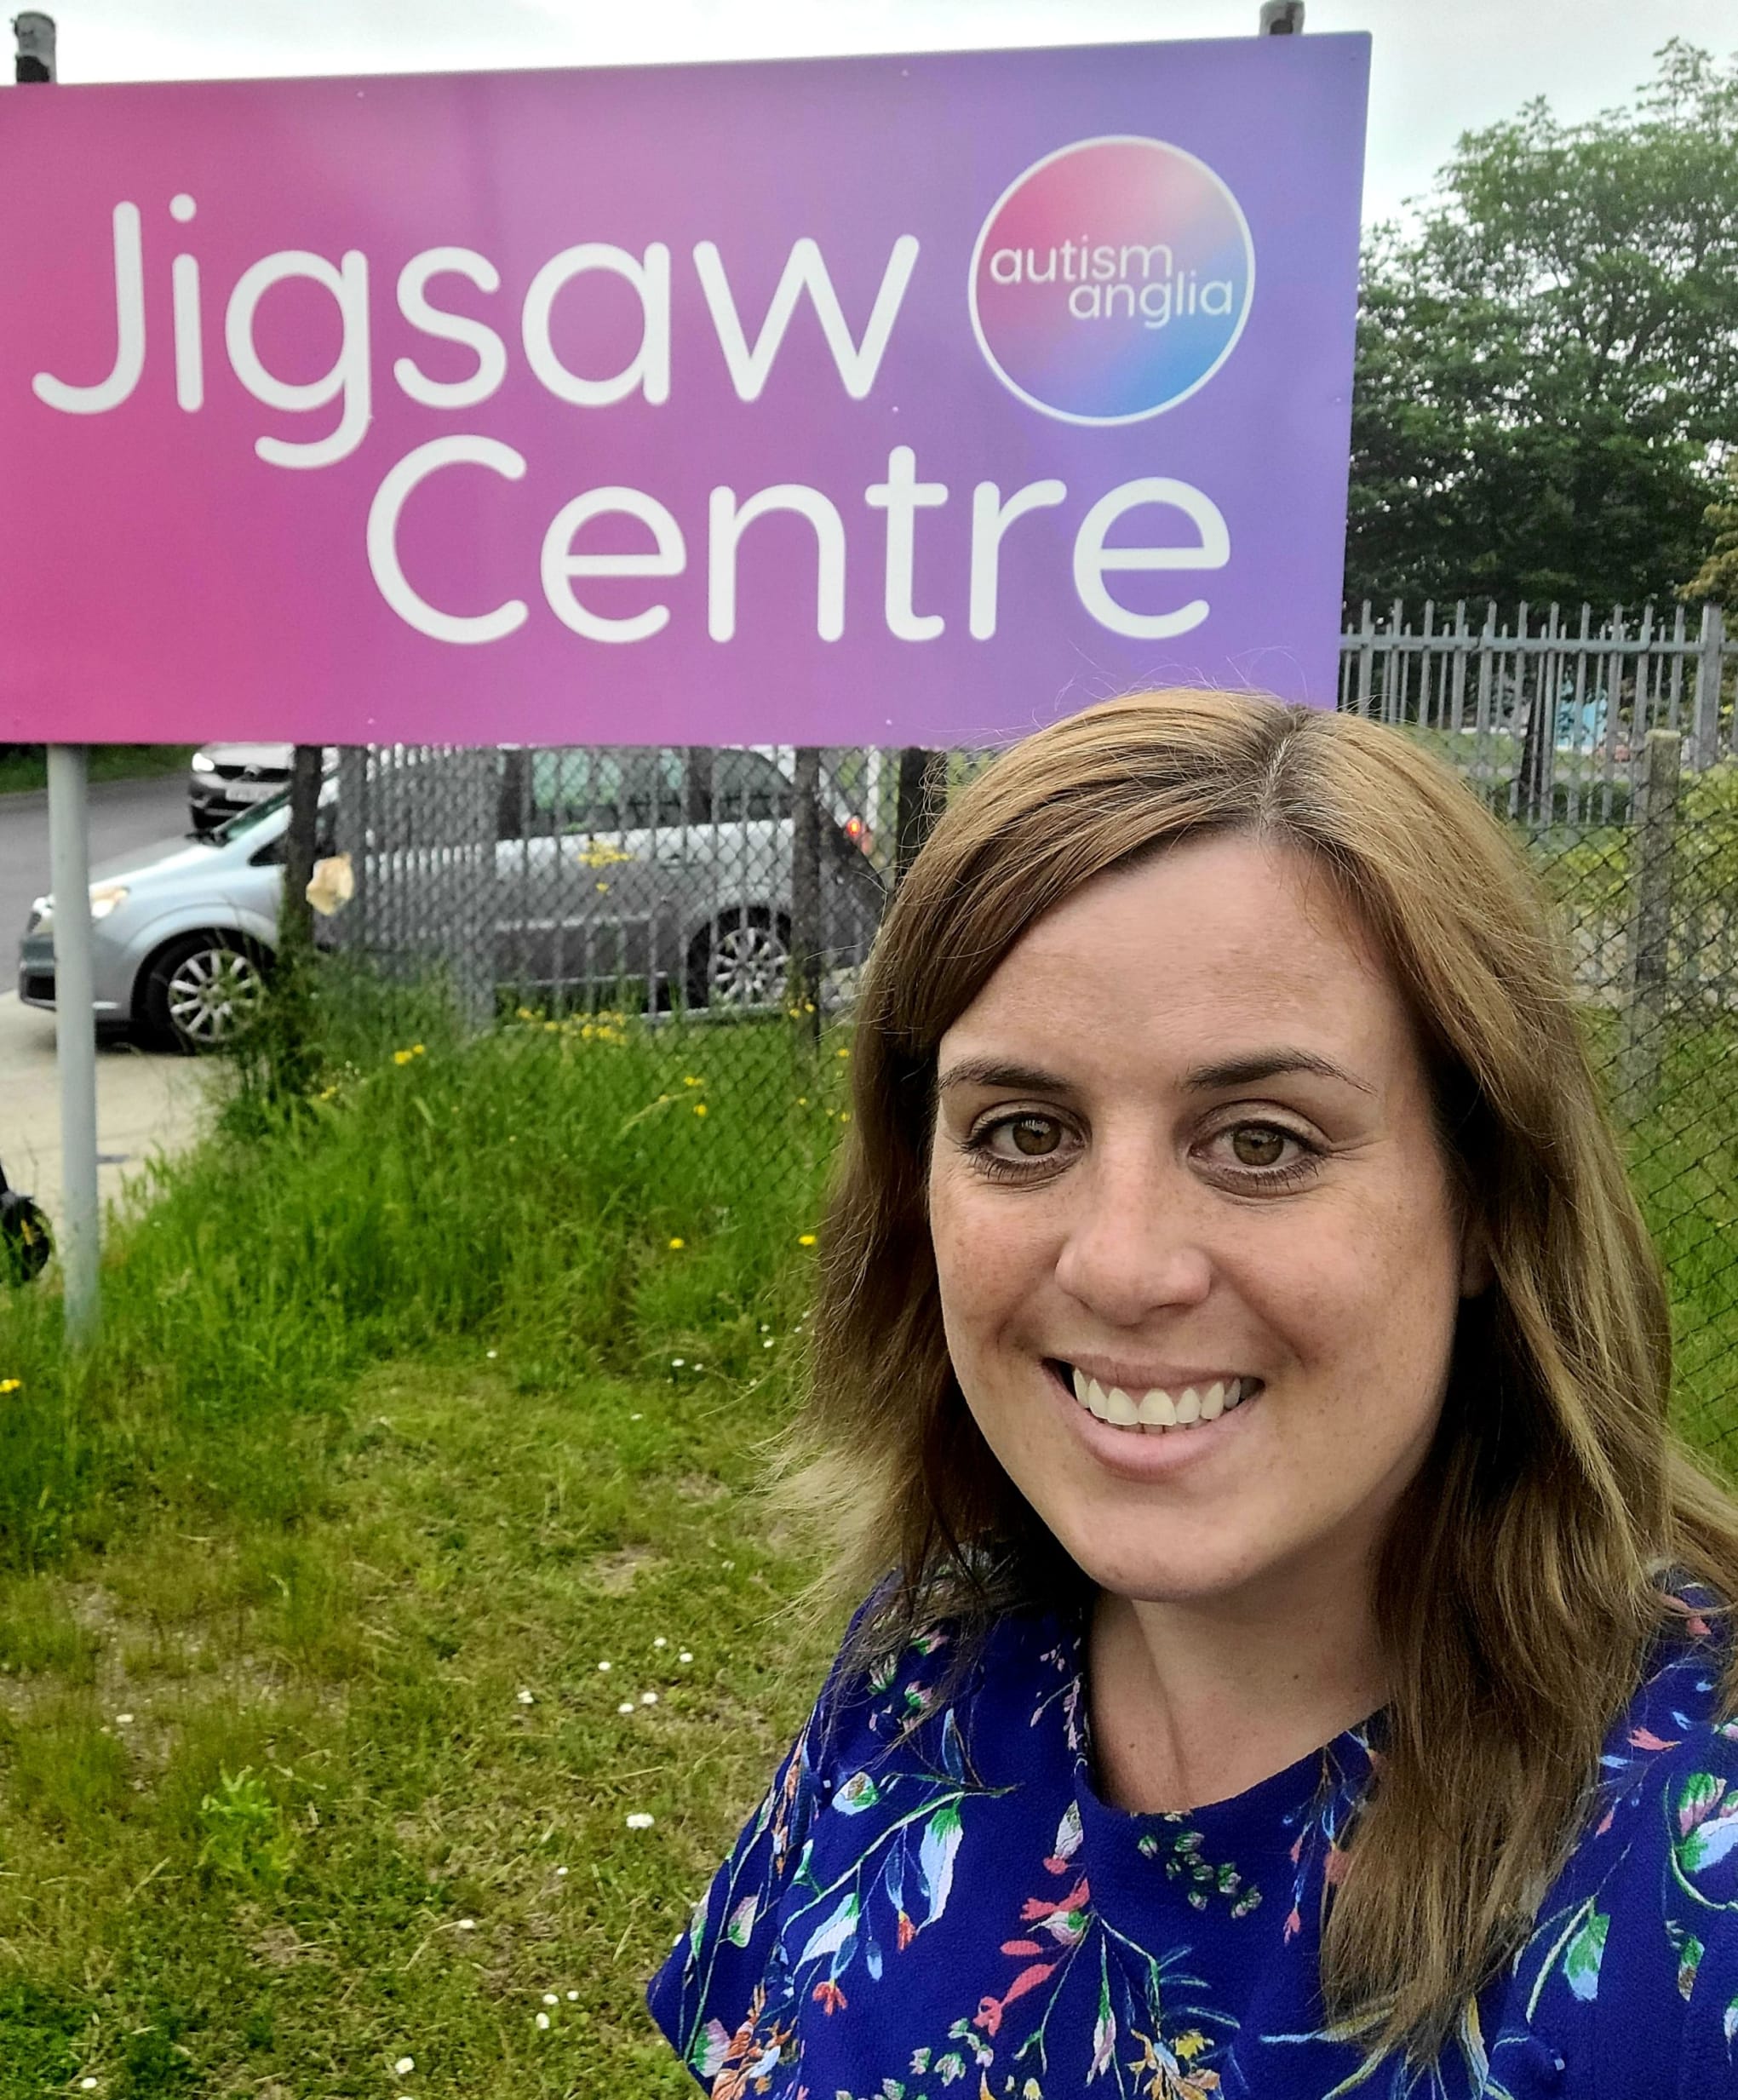 Hayley Favell outside the Autism Anglia Jigsaw Centre in Colchester